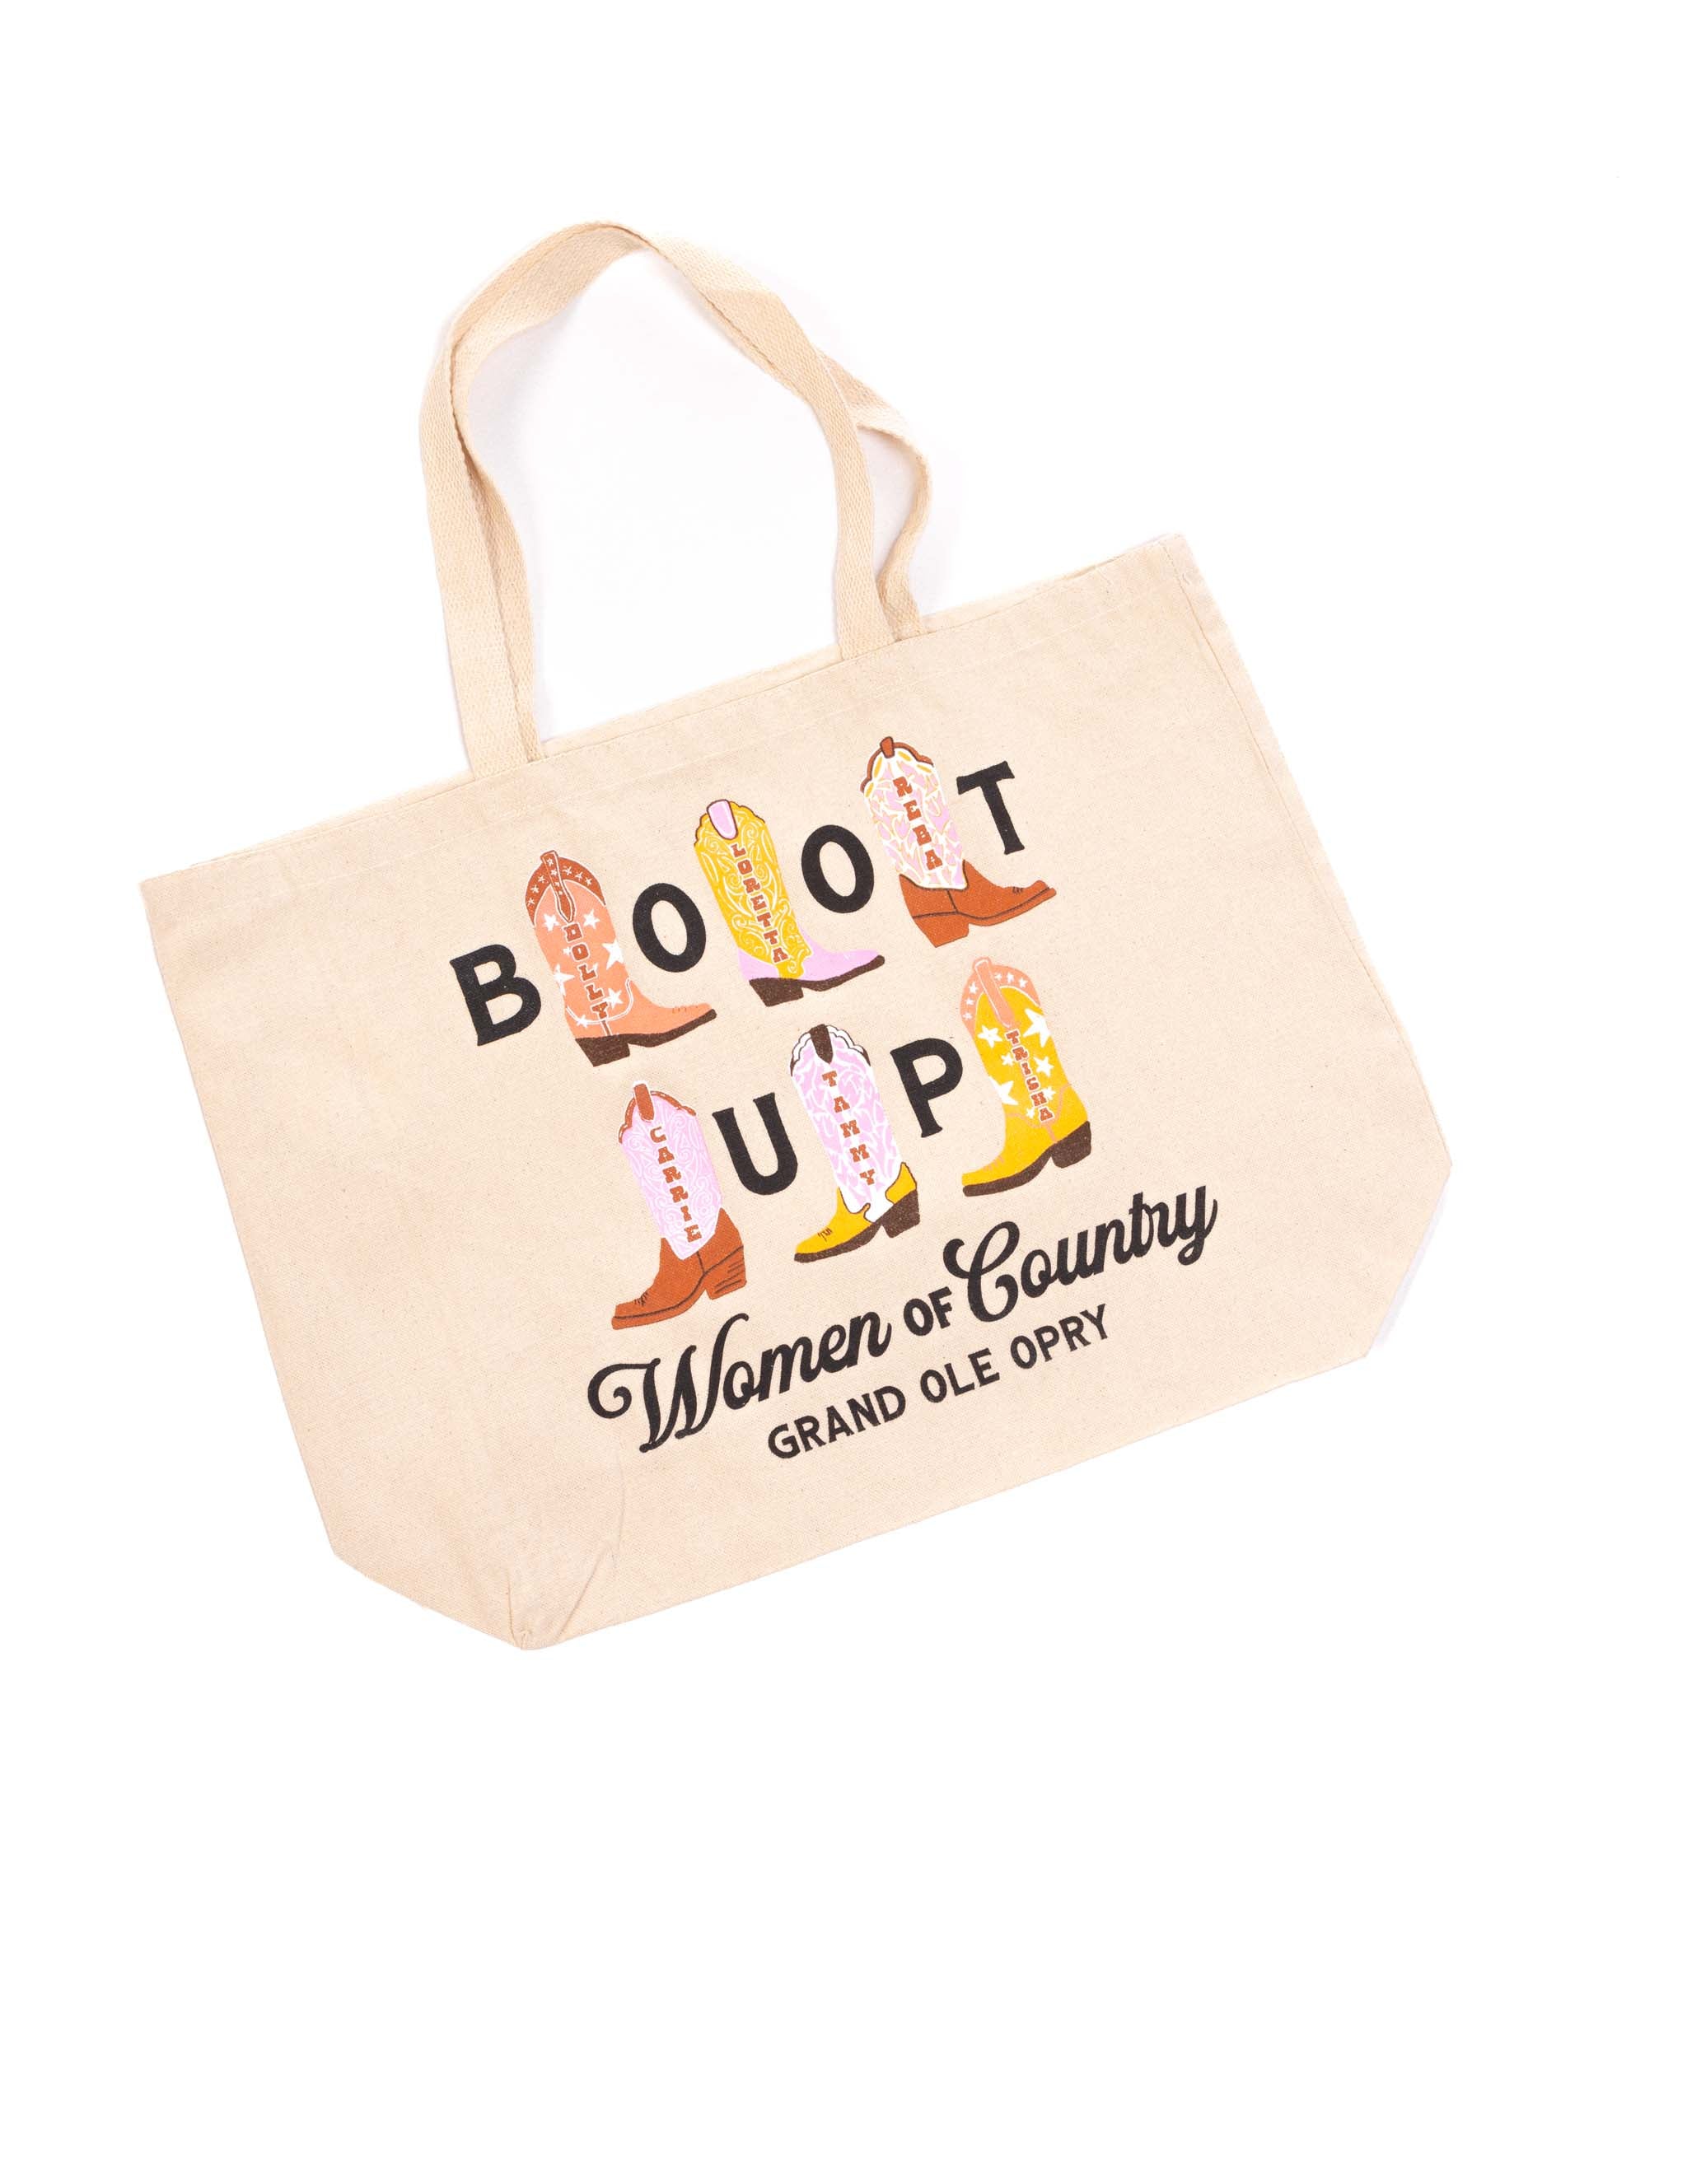 Opry Women of Country Boot Up Canvas Tote